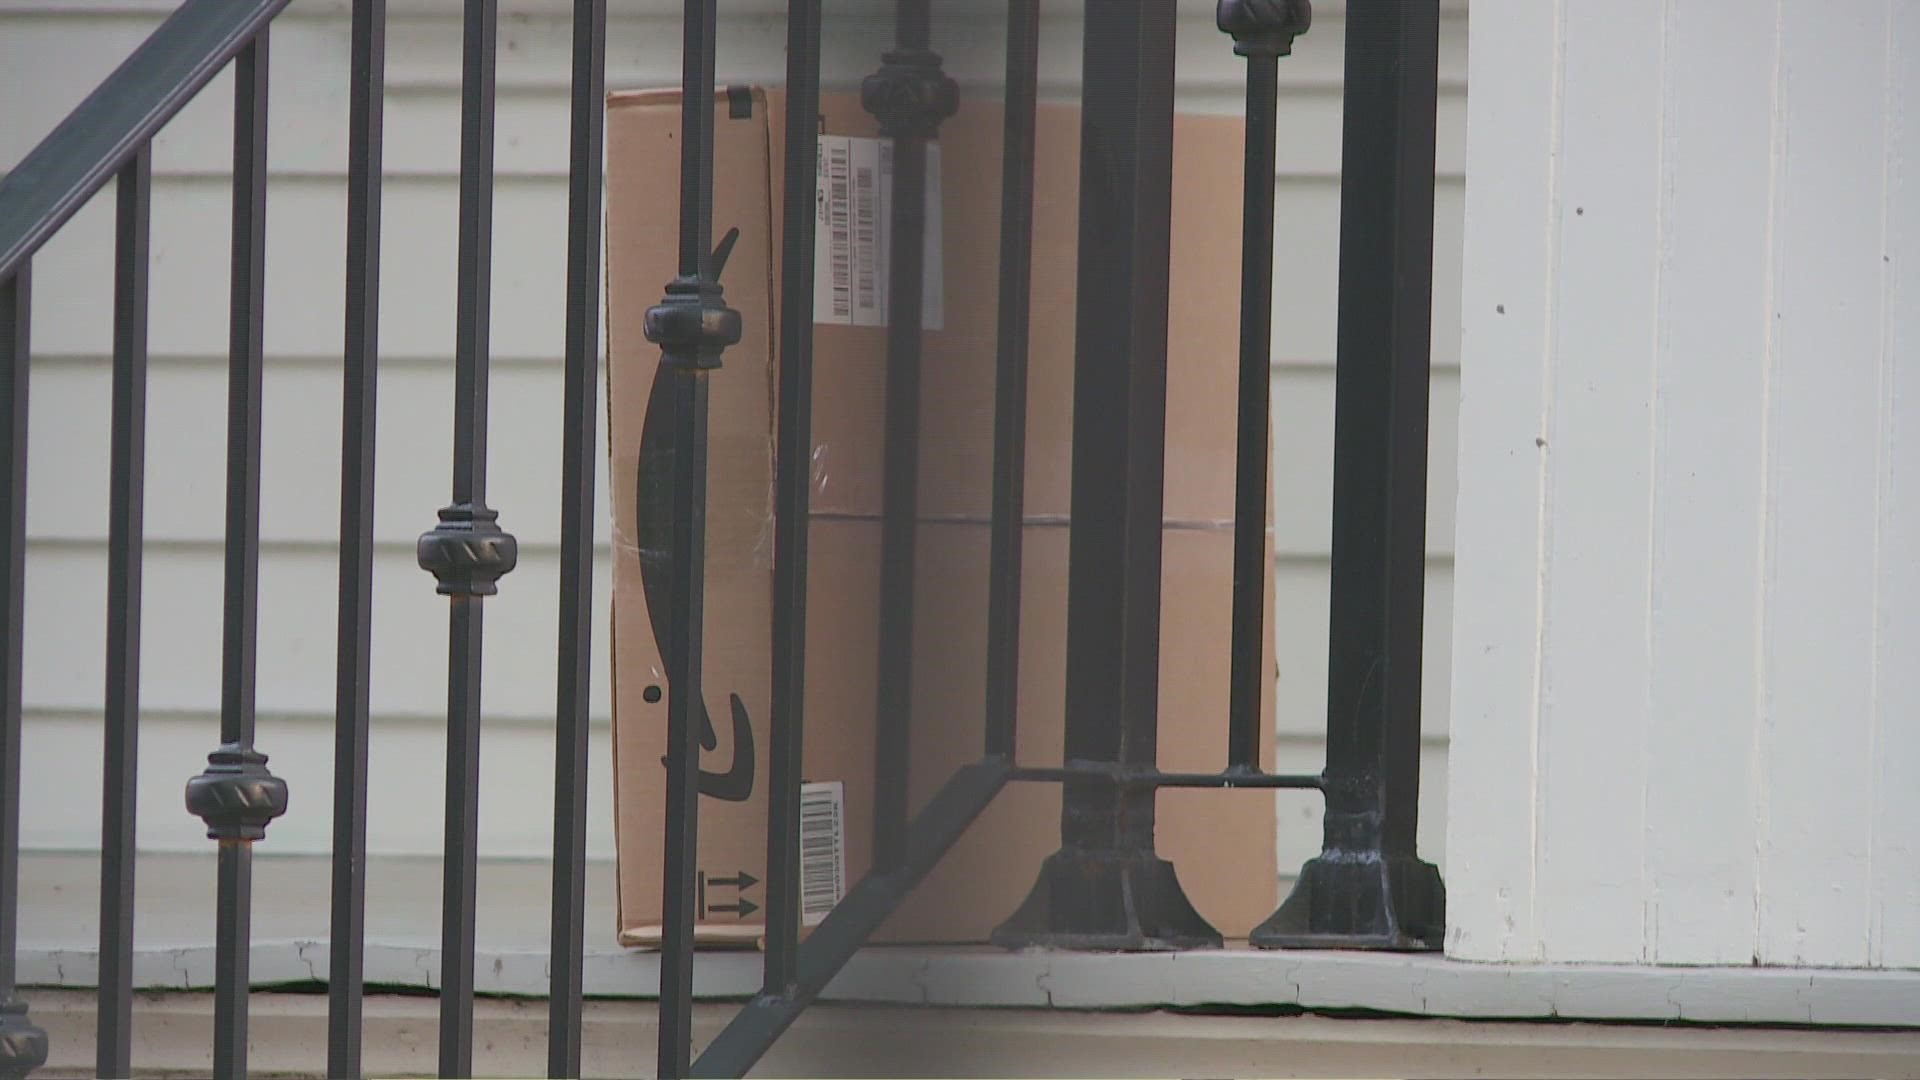 The NOPD is warning people to watch out for "porch pirates", thieves who steal packages this holiday season.